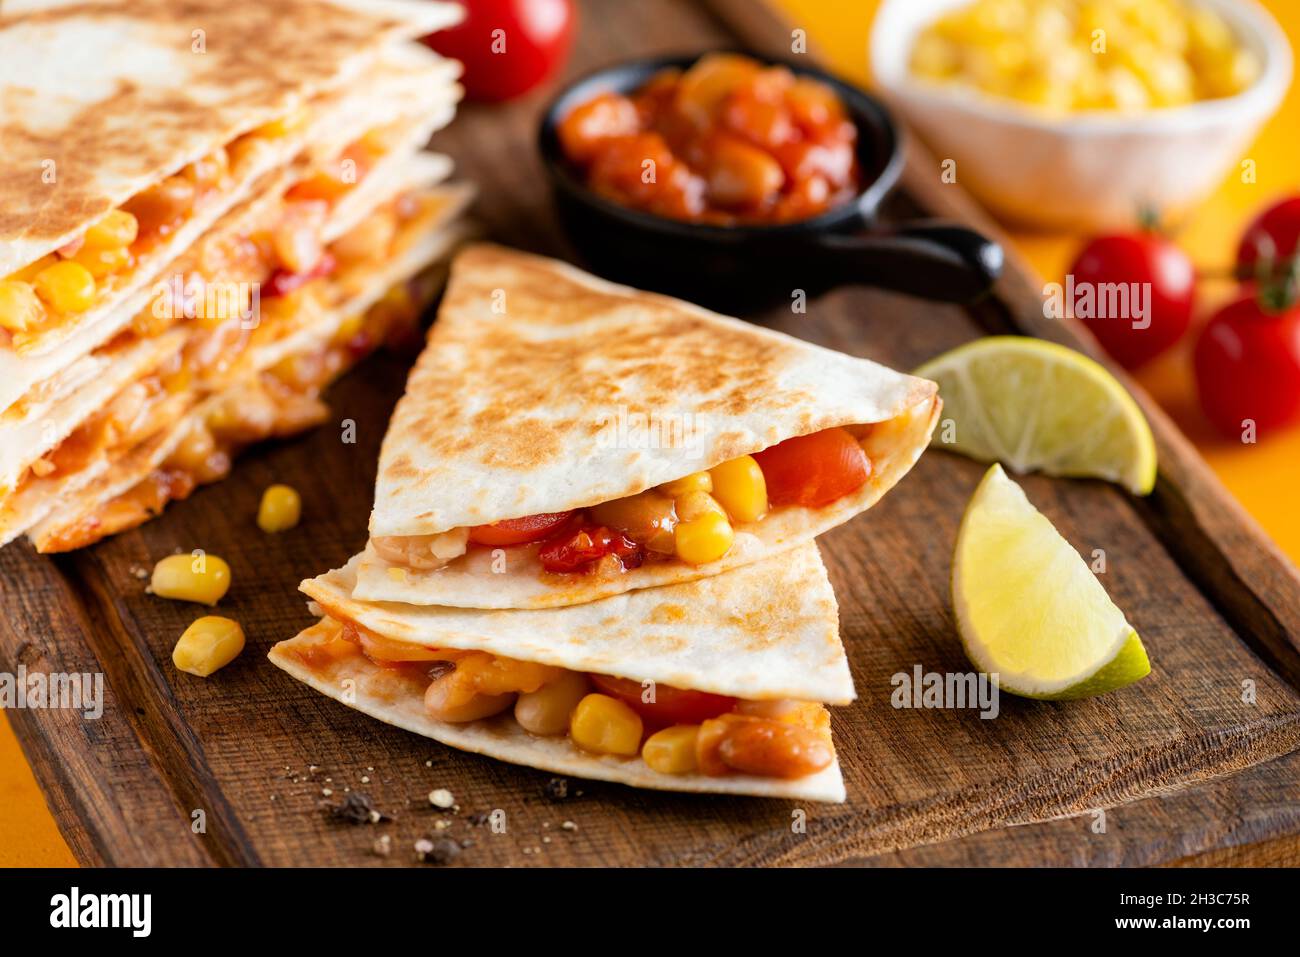 Vegetarian quesadilla with beans and tomatoes on wooden board, closeup view. Mexican cuisine food Stock Photo